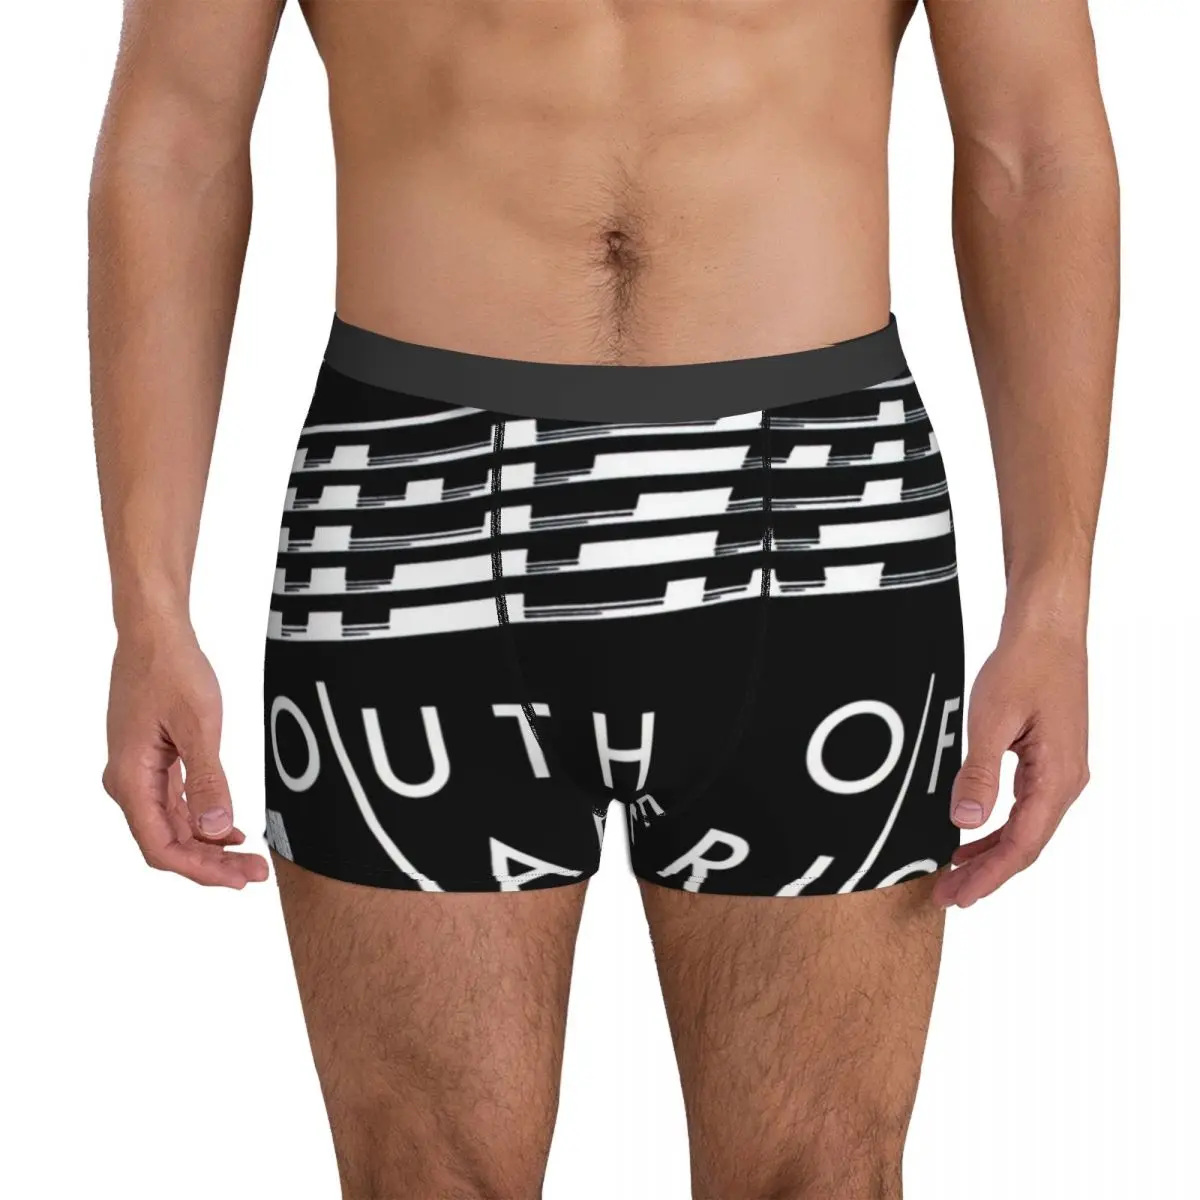 Youth Wipers Band Album Songs Underwear record vinyl artist cool man Men Underpants Sublimation Trunk High Quality Shorts Briefs